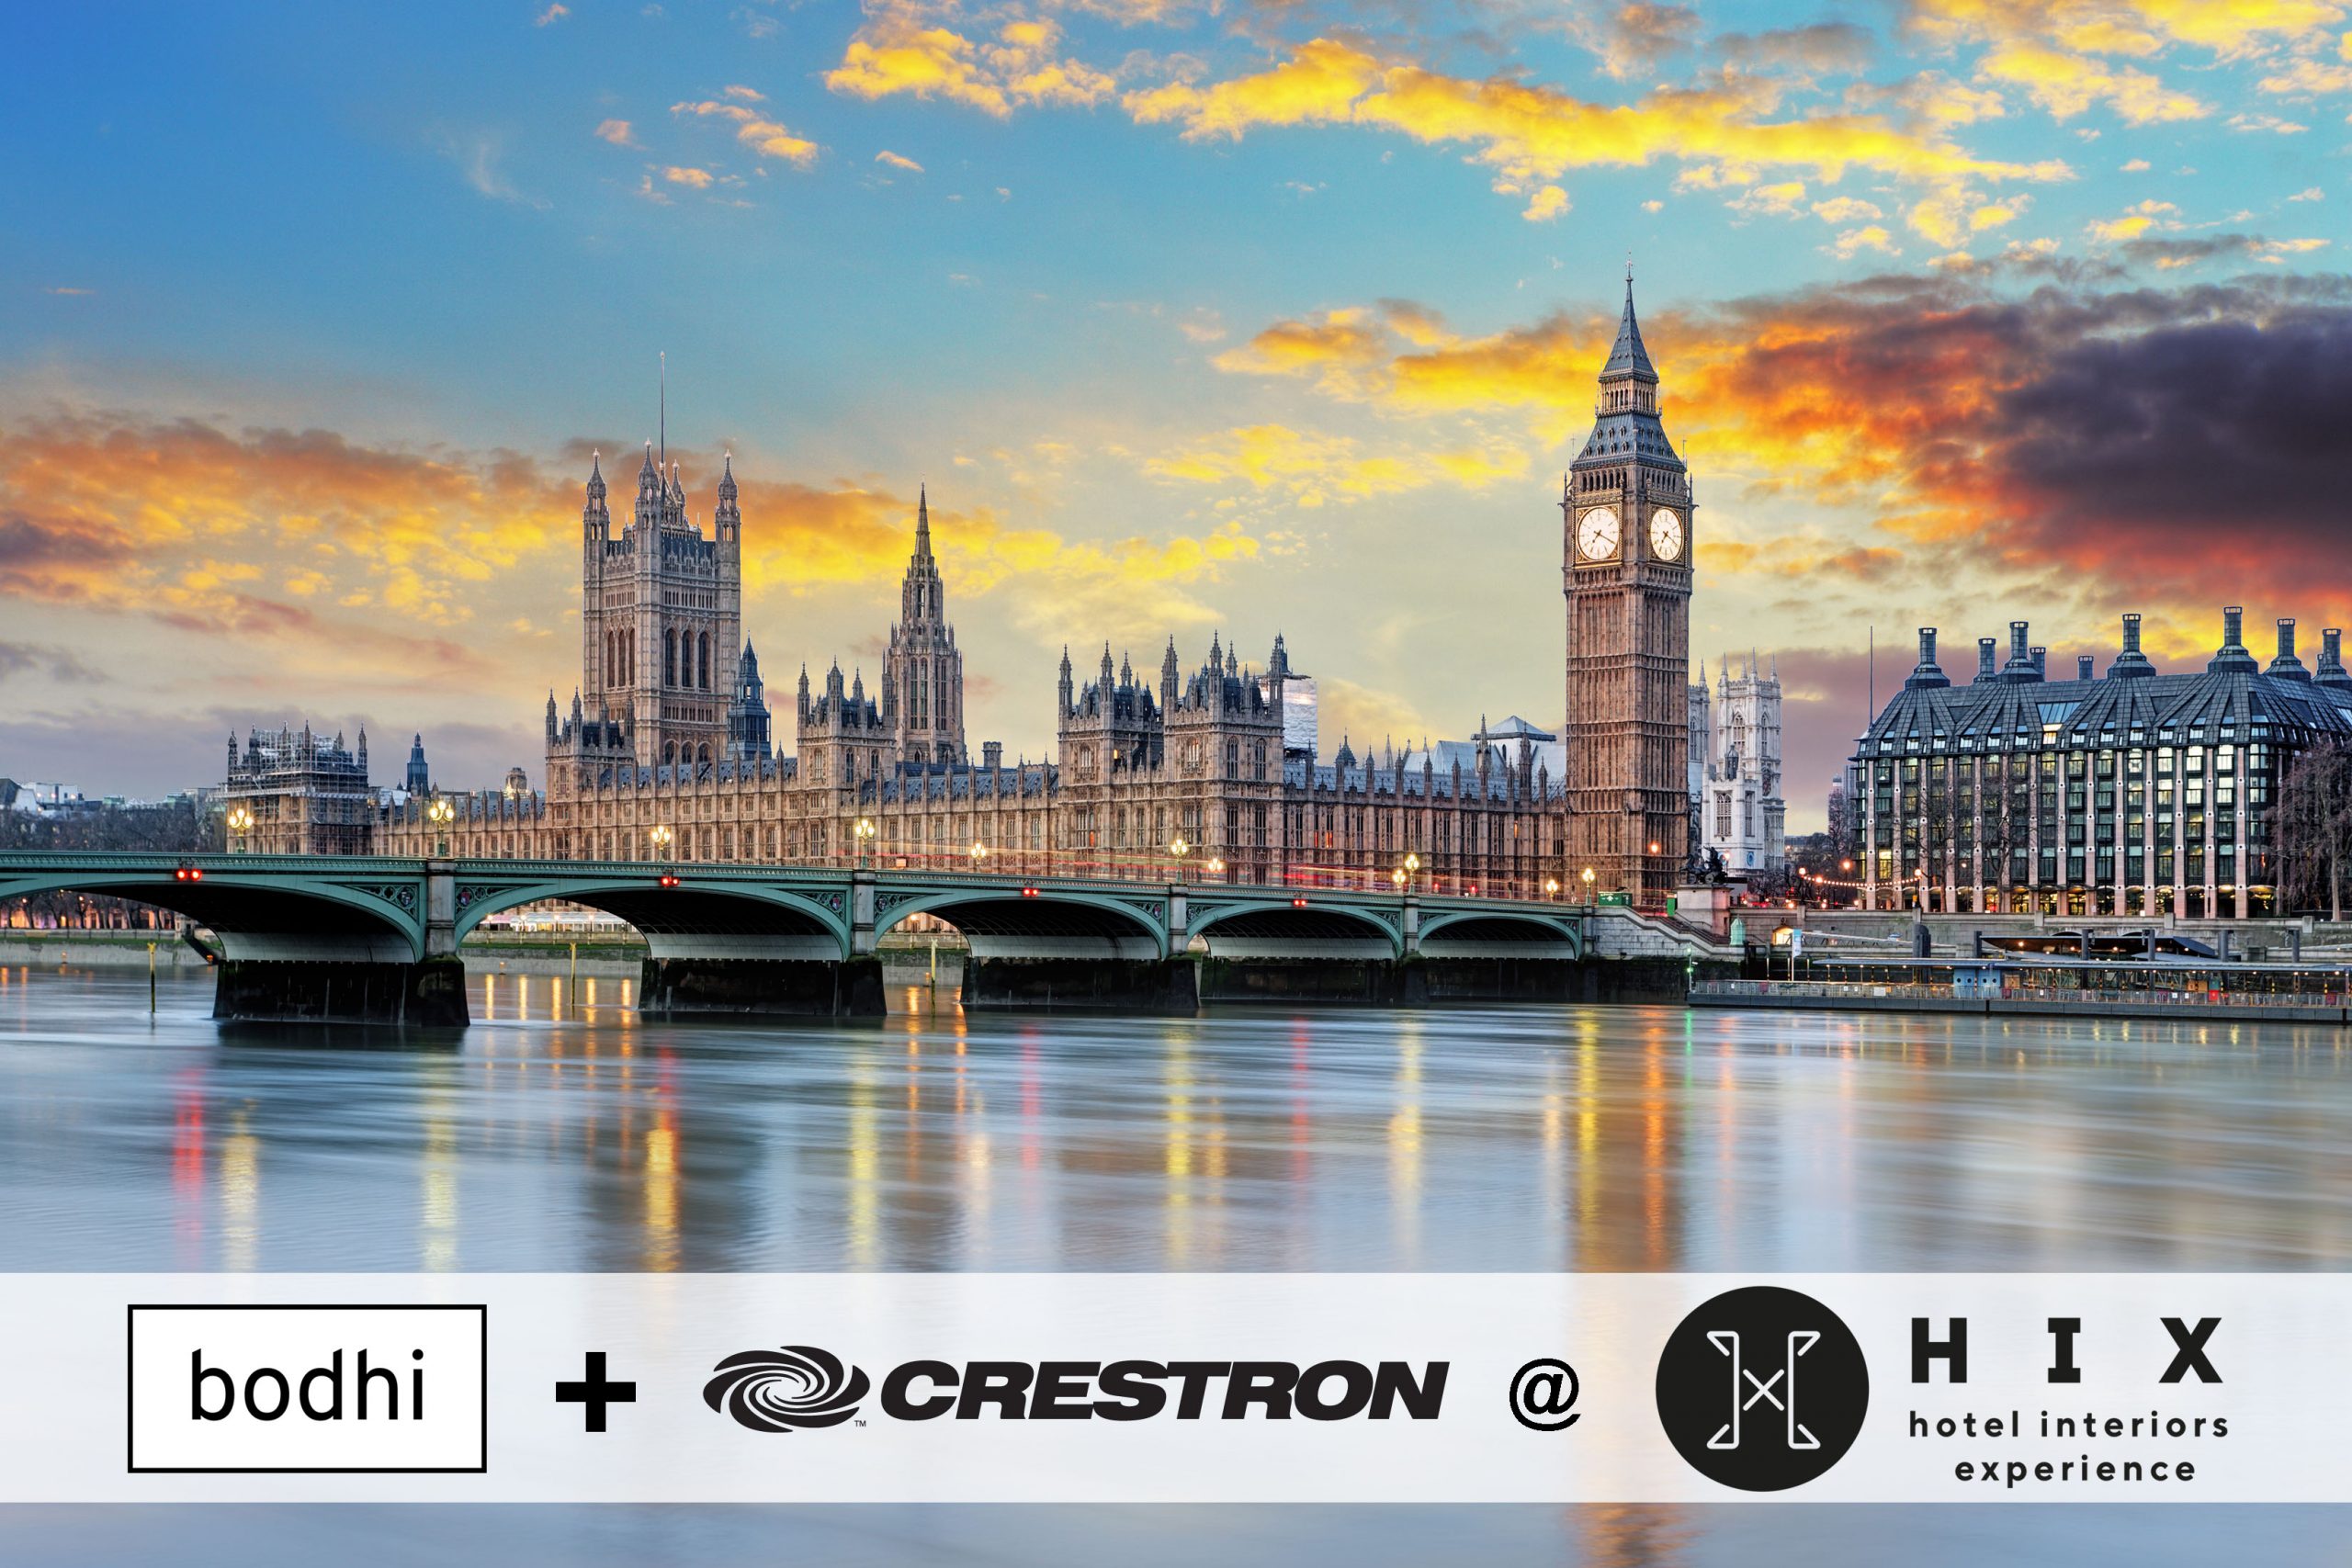 Bodhi and Crestron will be at HIX 2022, Nov 17-18, London